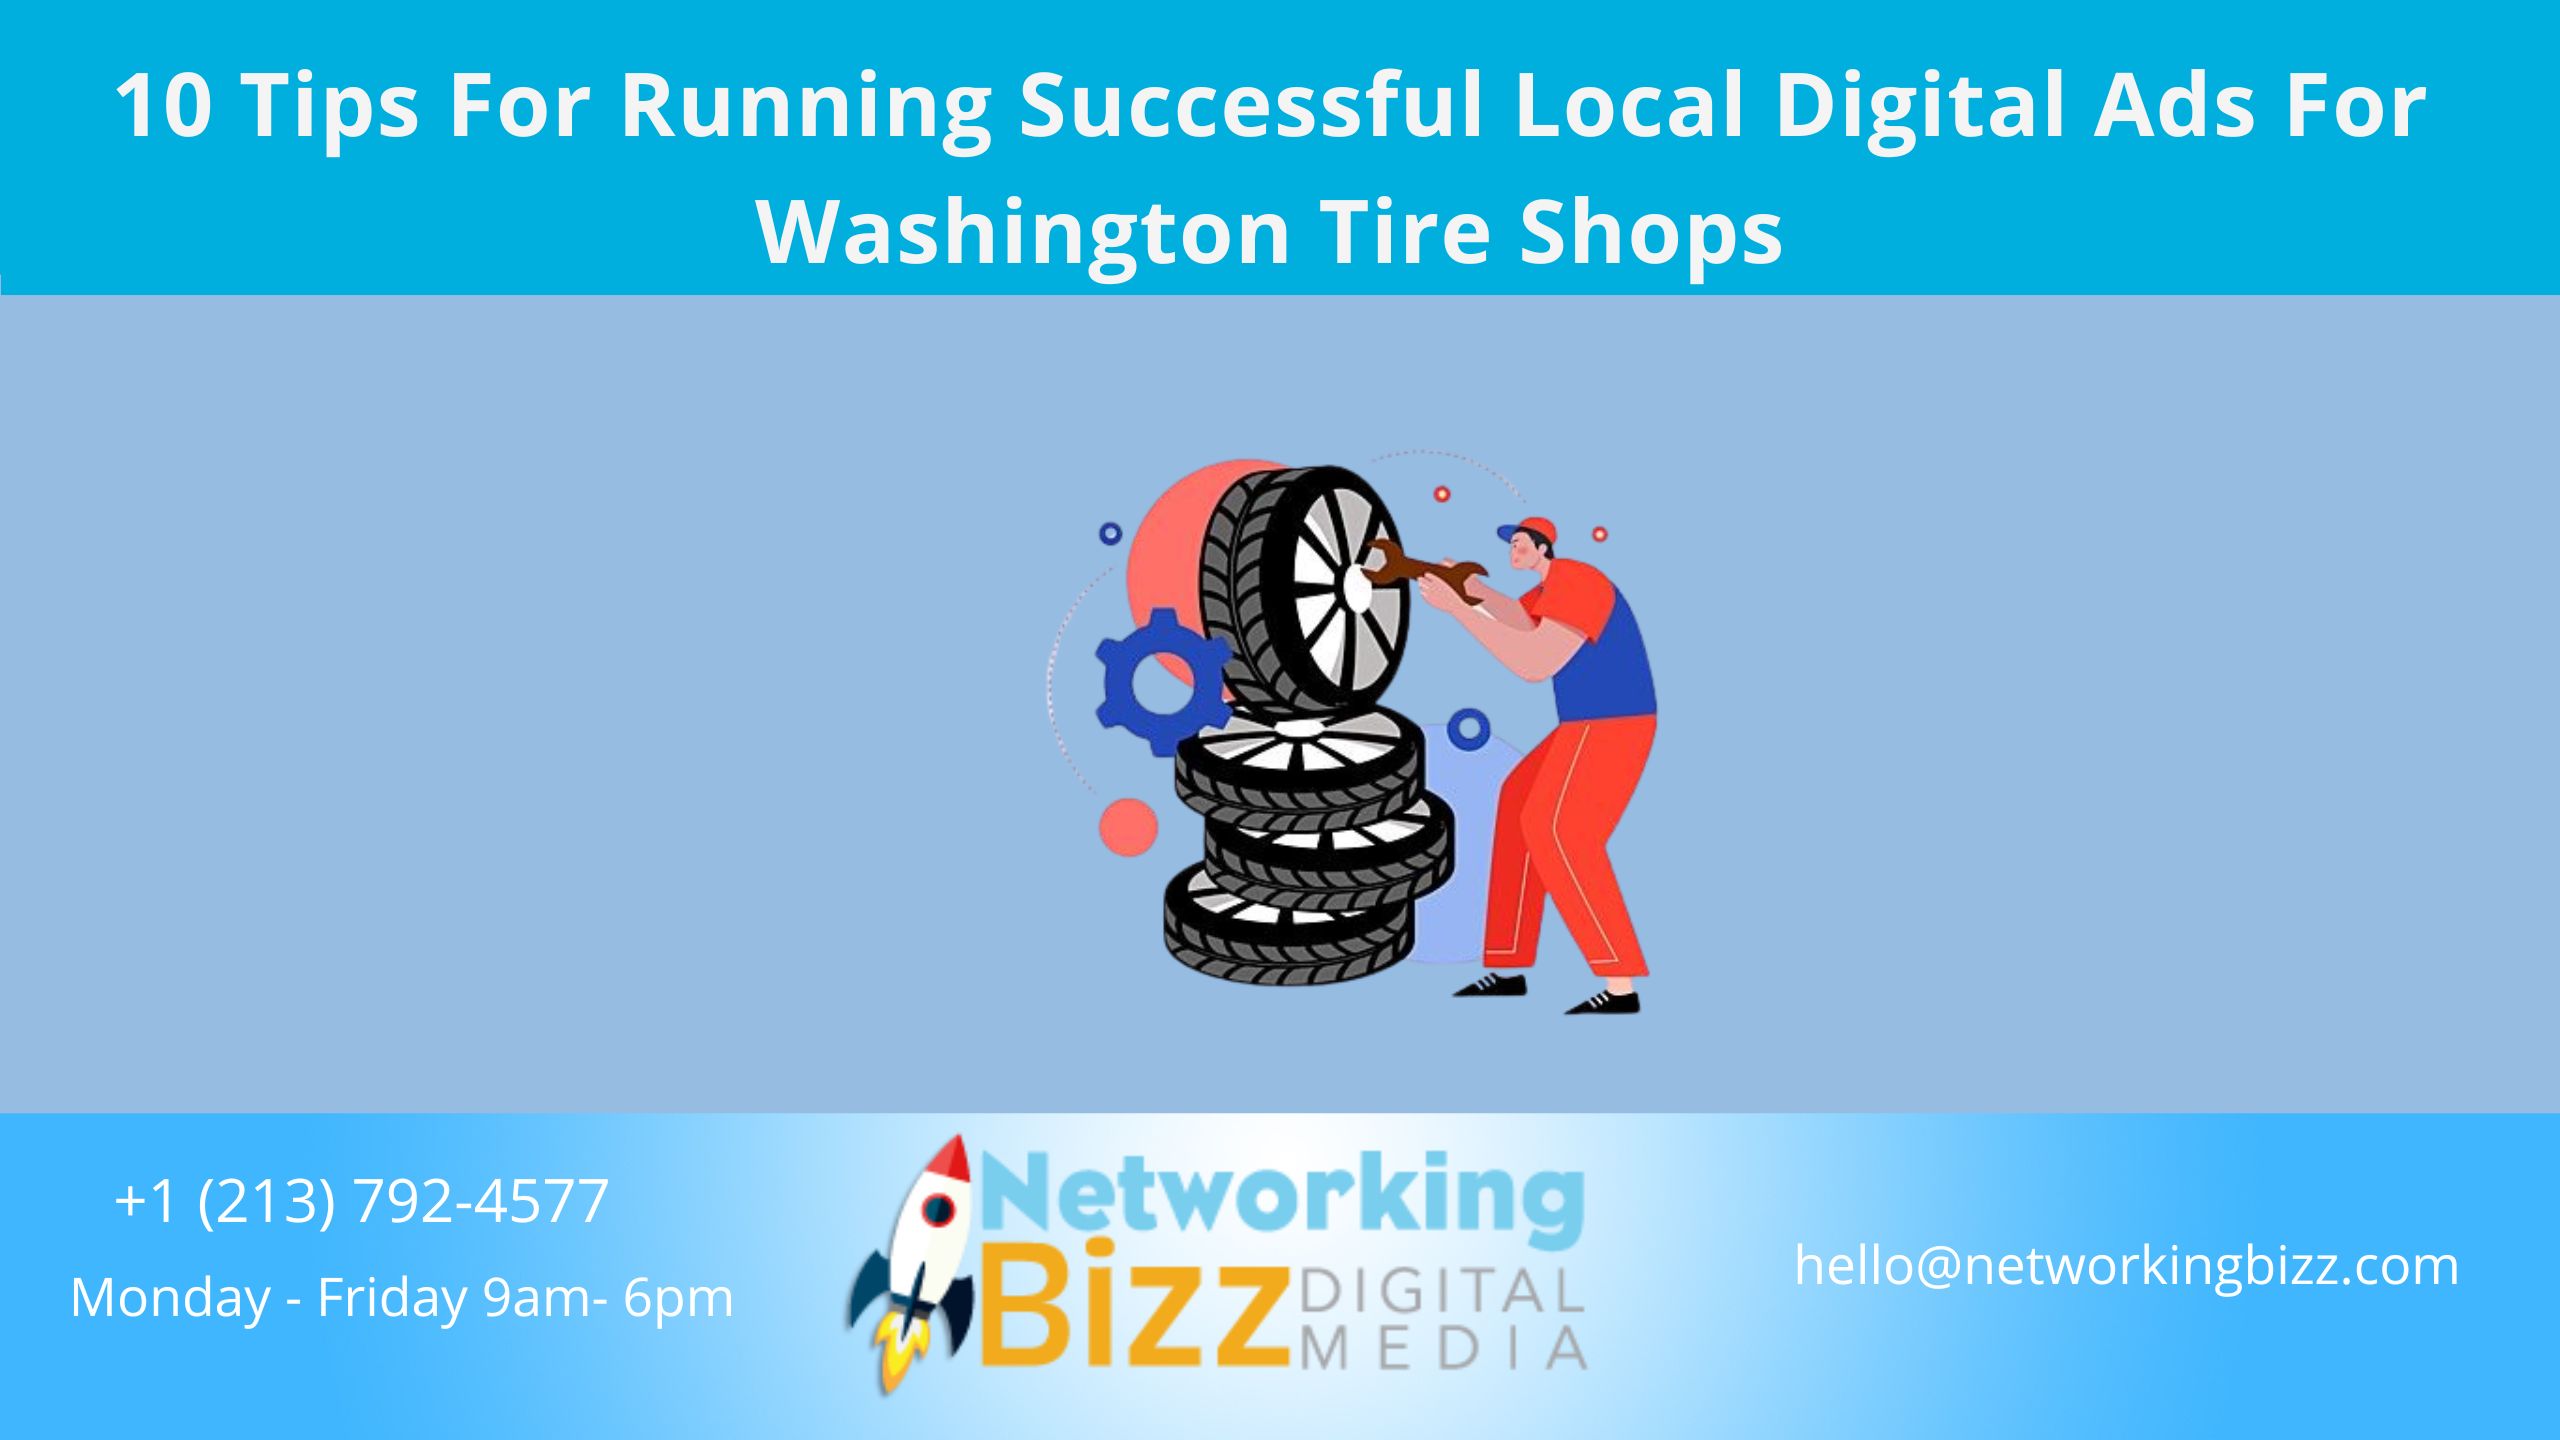 10 Tips For Running Successful Local Digital Ads For Washington Tire Shops